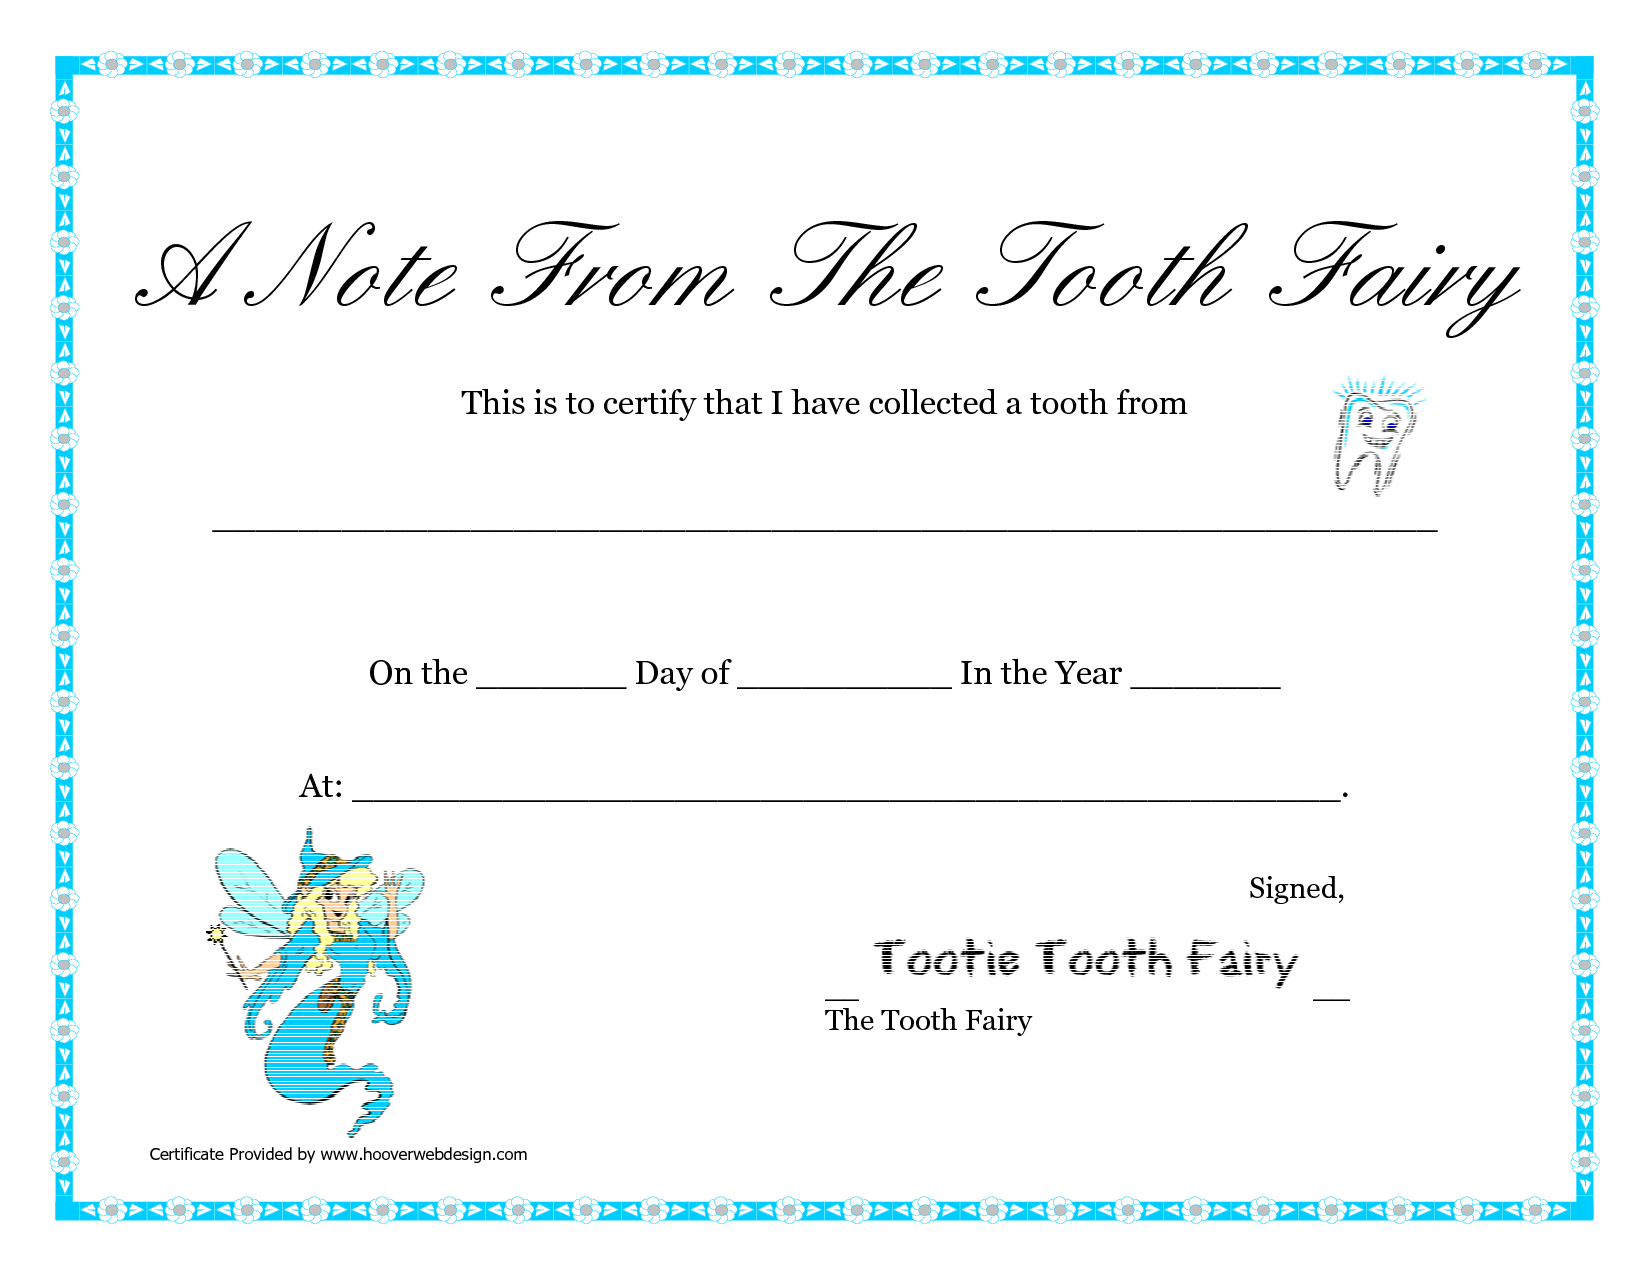 Free Printable Tooth Fairy Letter | Tooth Fairy Certificate - Free Printable Tooth Fairy Letters